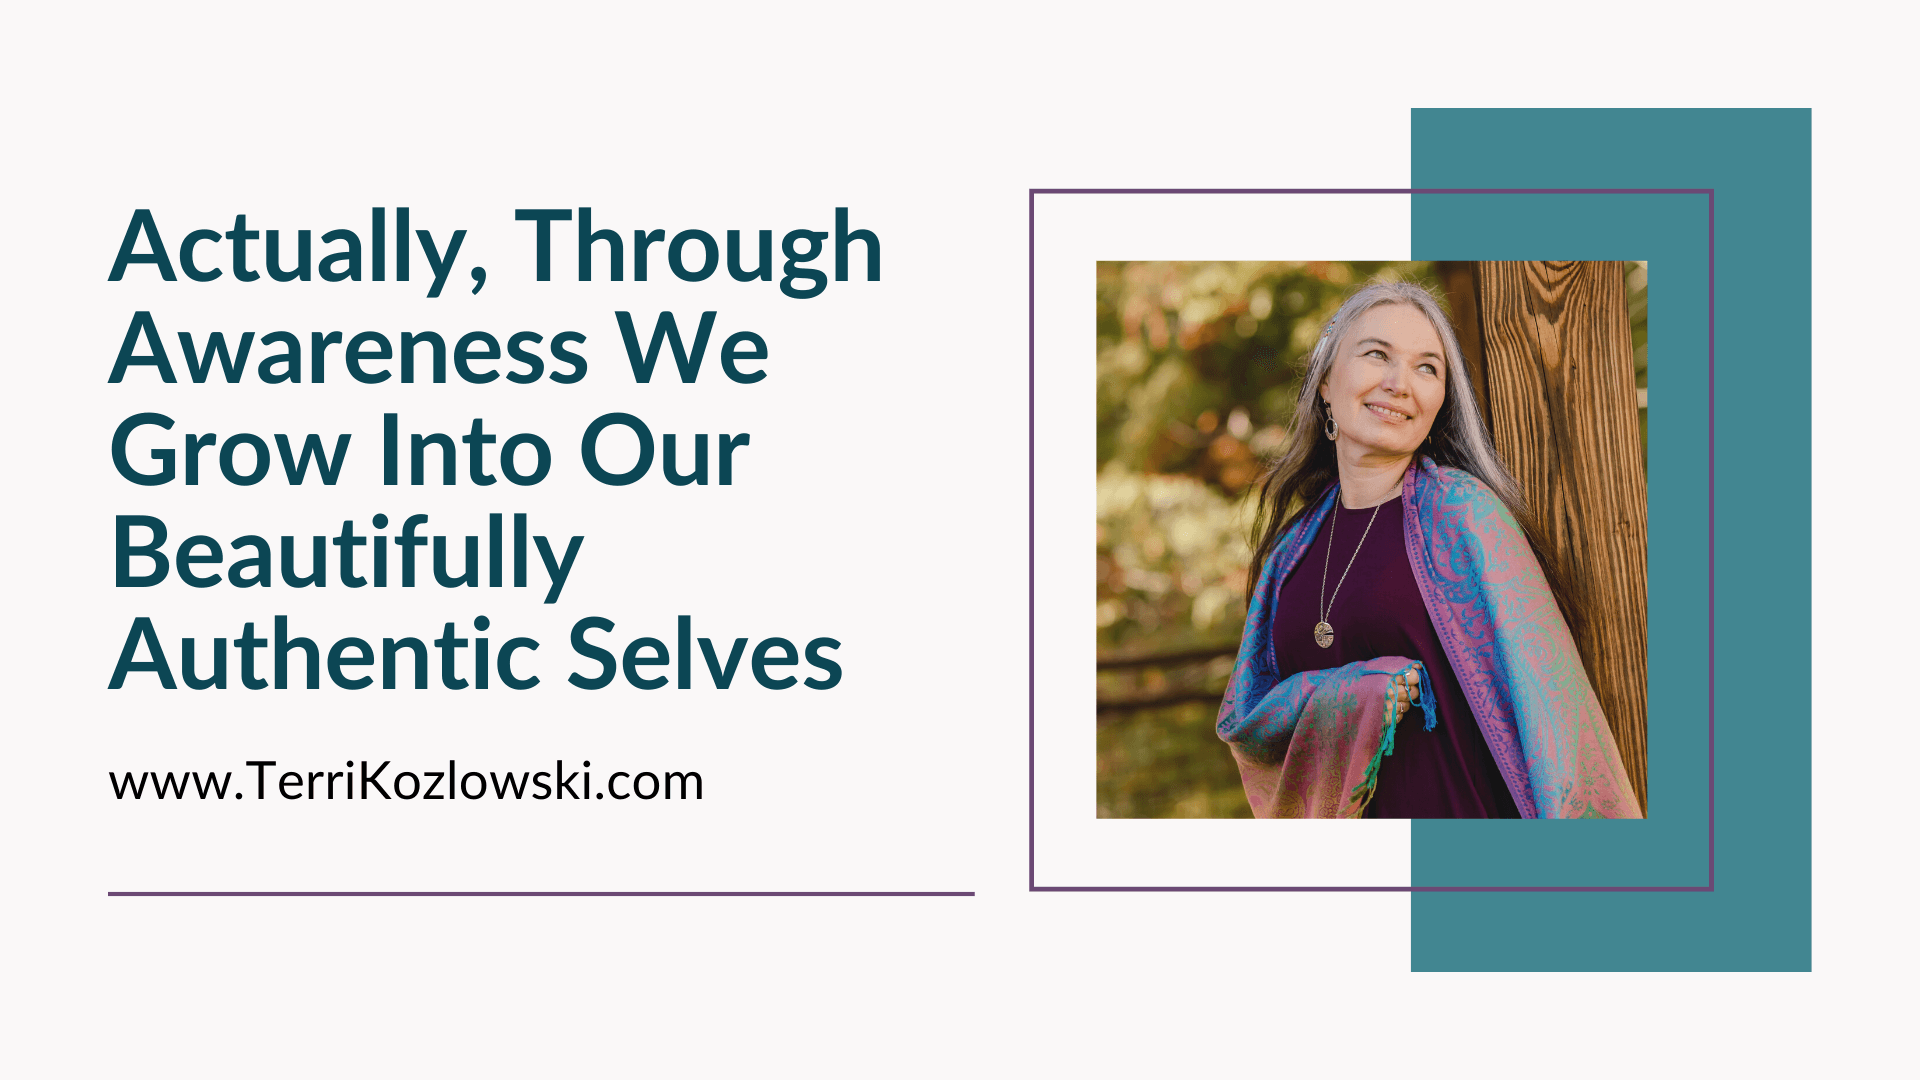 Actually, Through Awareness We Grow Into Our Beautifully Authentic Selves